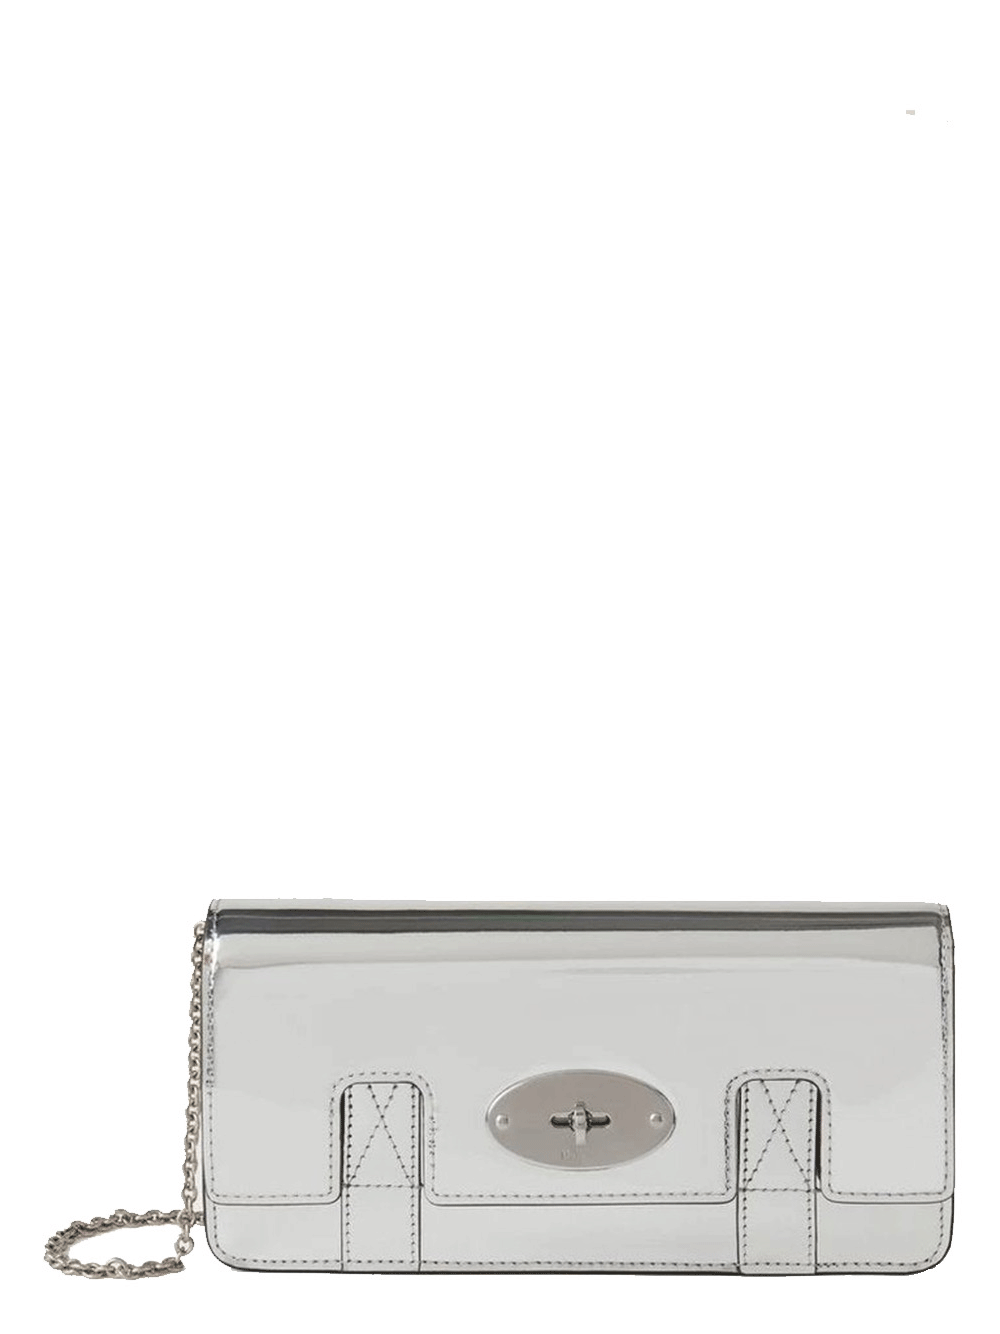 Mulberry-EastWestBayswaterClutchMirrorPlainVersion-Silver-1